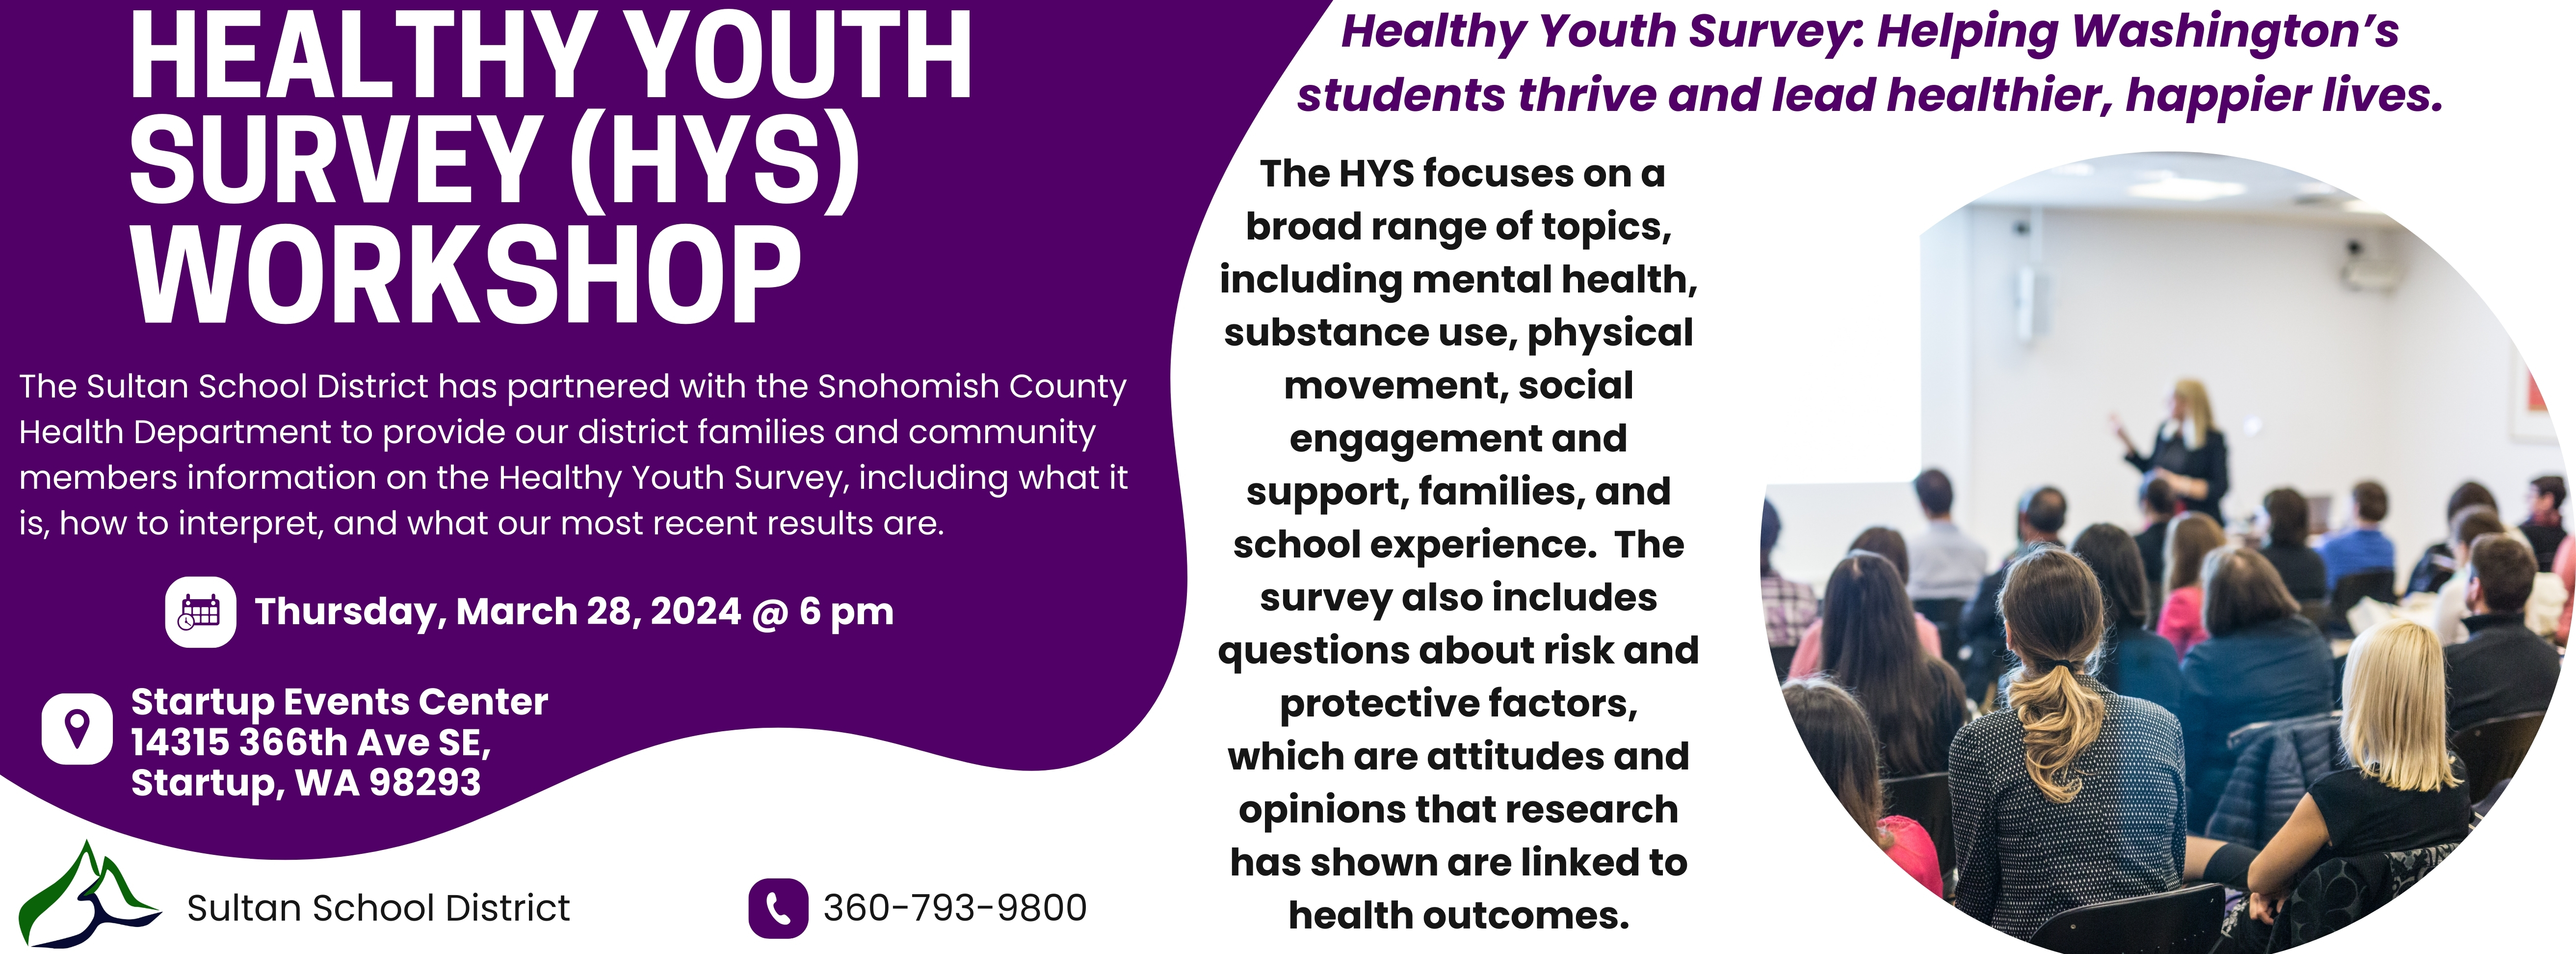 ONE WEEK FROM TODAY:  **☺☼ Healthy Youth Survey (HYS) Workshop! ☼☺** Thursday, March 28th, 2024 6:00pm Startup Event Center   The Sultan School District has partnered with the Snohomish County Health Department to provide our district families and community members information on the Healthy Youth Survey, including what it is, how to interpret, and what our most recent results are.   Healthy Youth Survey: Helping Washington’s students thrive and lead healthier, happier lives.    The HYS focuses on a broad range of topics, including mental health, substance use, physical movement, social engagement and support, families, and school experience. The survey also includes questions about risk and protective factors, which are attitudes and opinions that research has shown are linked to health outcomes.   •	The survey shows trends over time and helps parents, schools, and communities address issues impacting youth. •	Schools and districts get reports of their results – helping them understand their students’ needs.  •	About 200,000 students in grades 6 -12 across the state take the survey every two years.  •	Participation is voluntary and anonymous. •	Free for schools in Washington State.  See you there!  Thank you, SSD